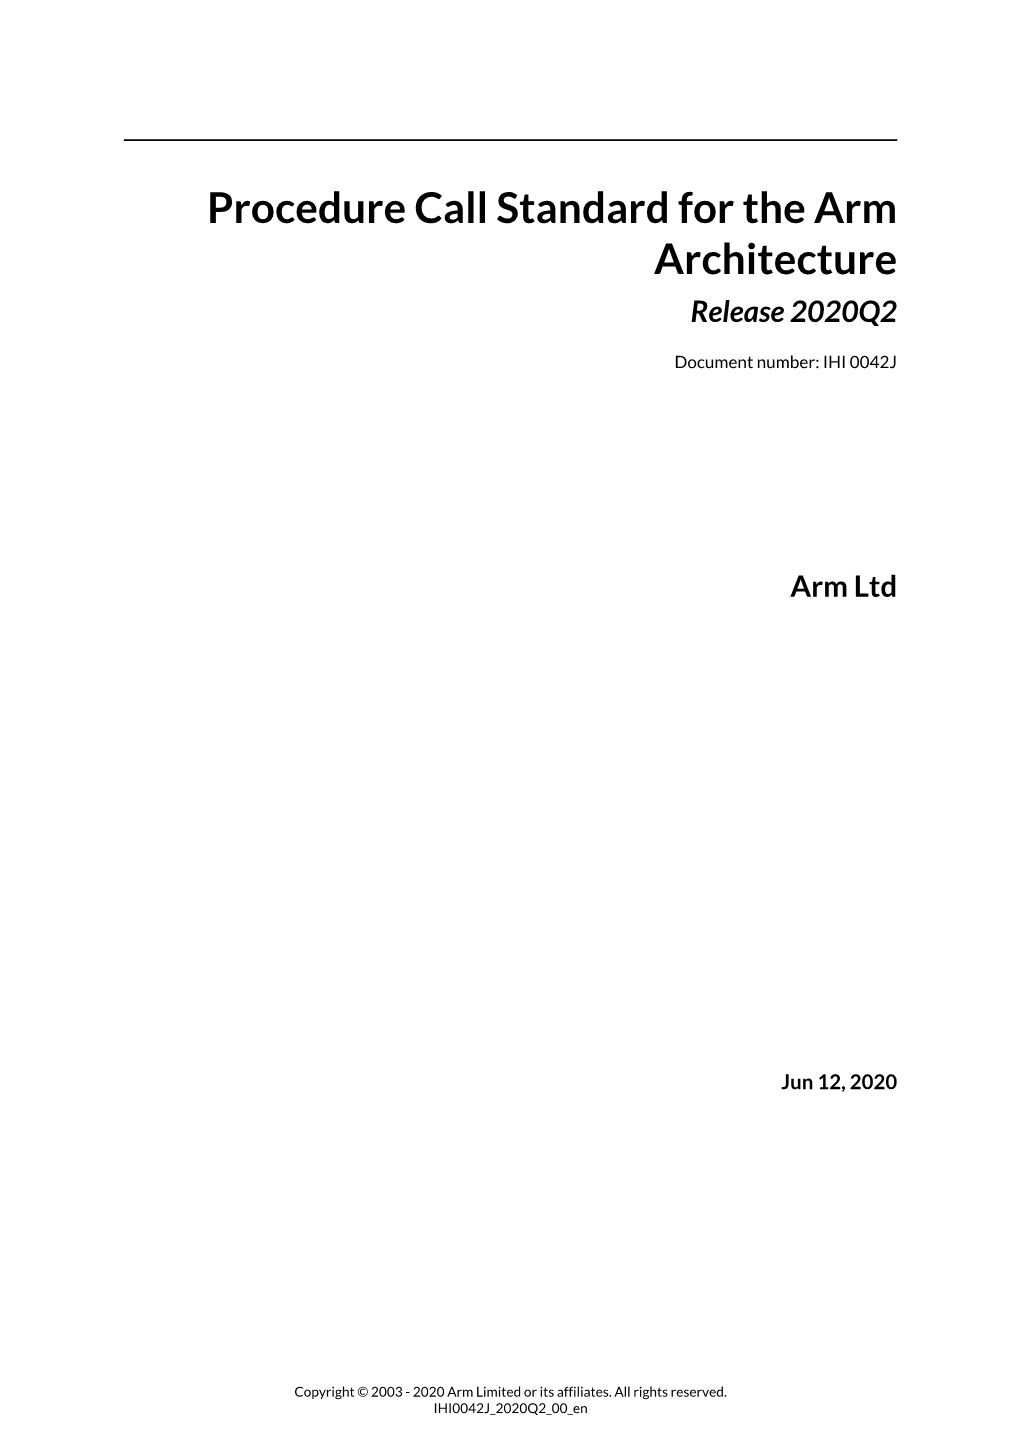 Procedure Call Standard for the Arm Architecture Release 2020Q2